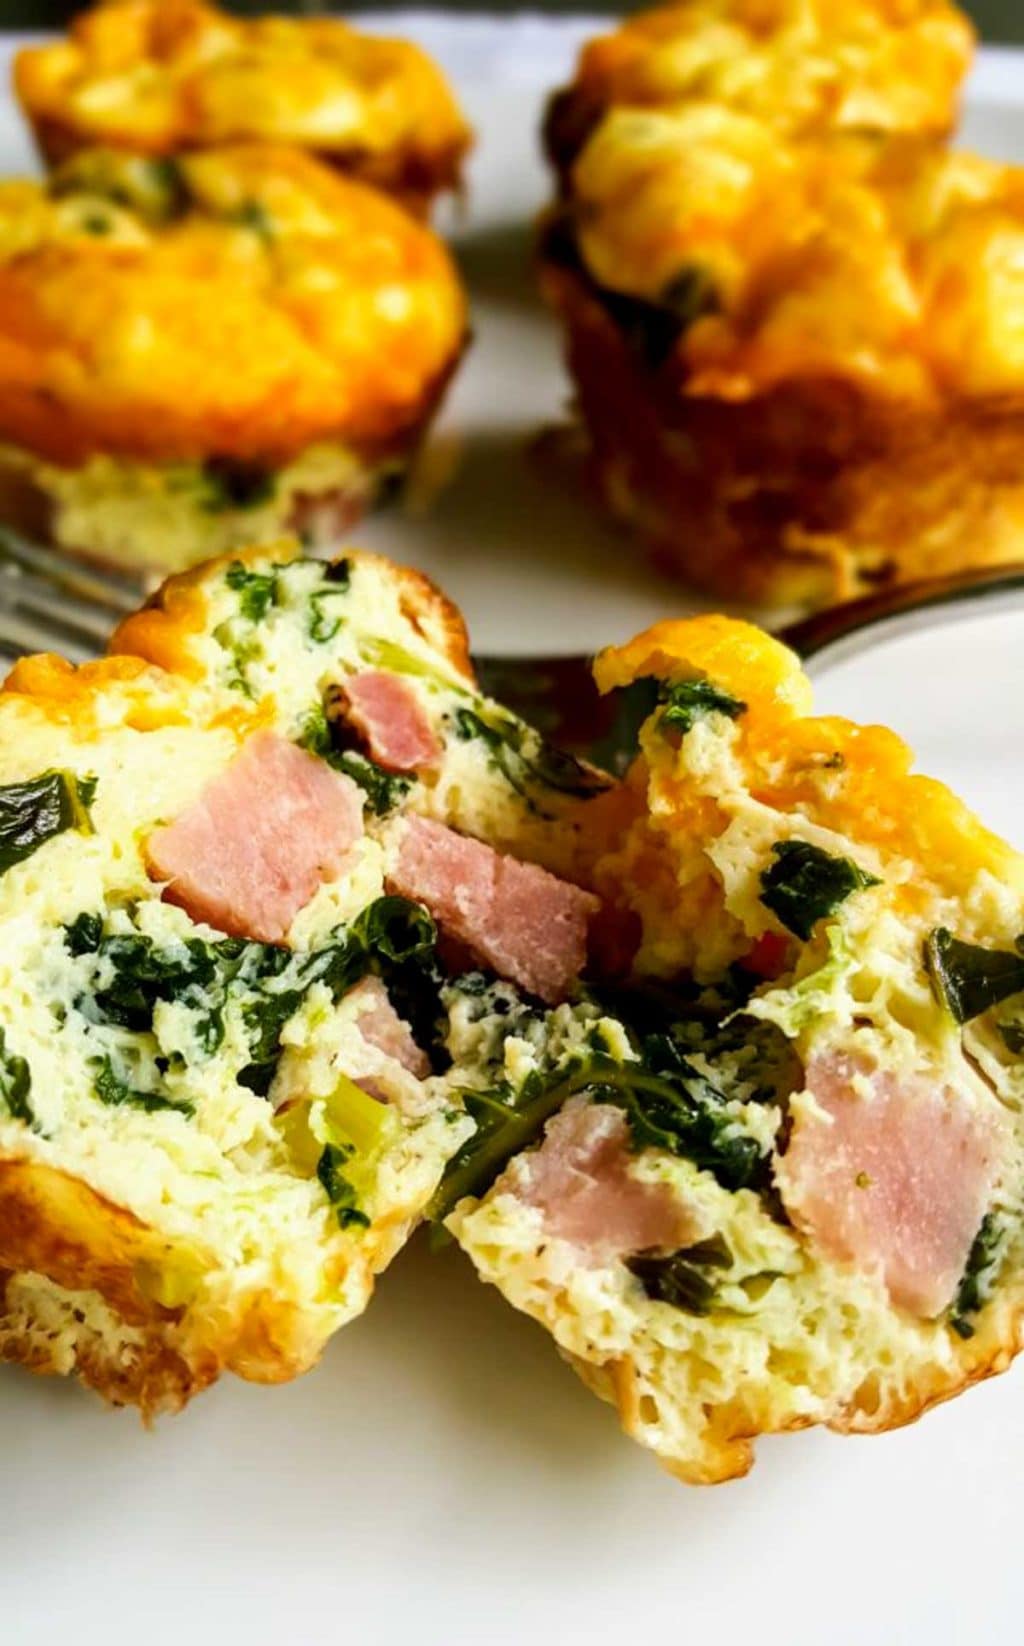 Ham and Kale Egg Cup split in half showing the ham and kale inside